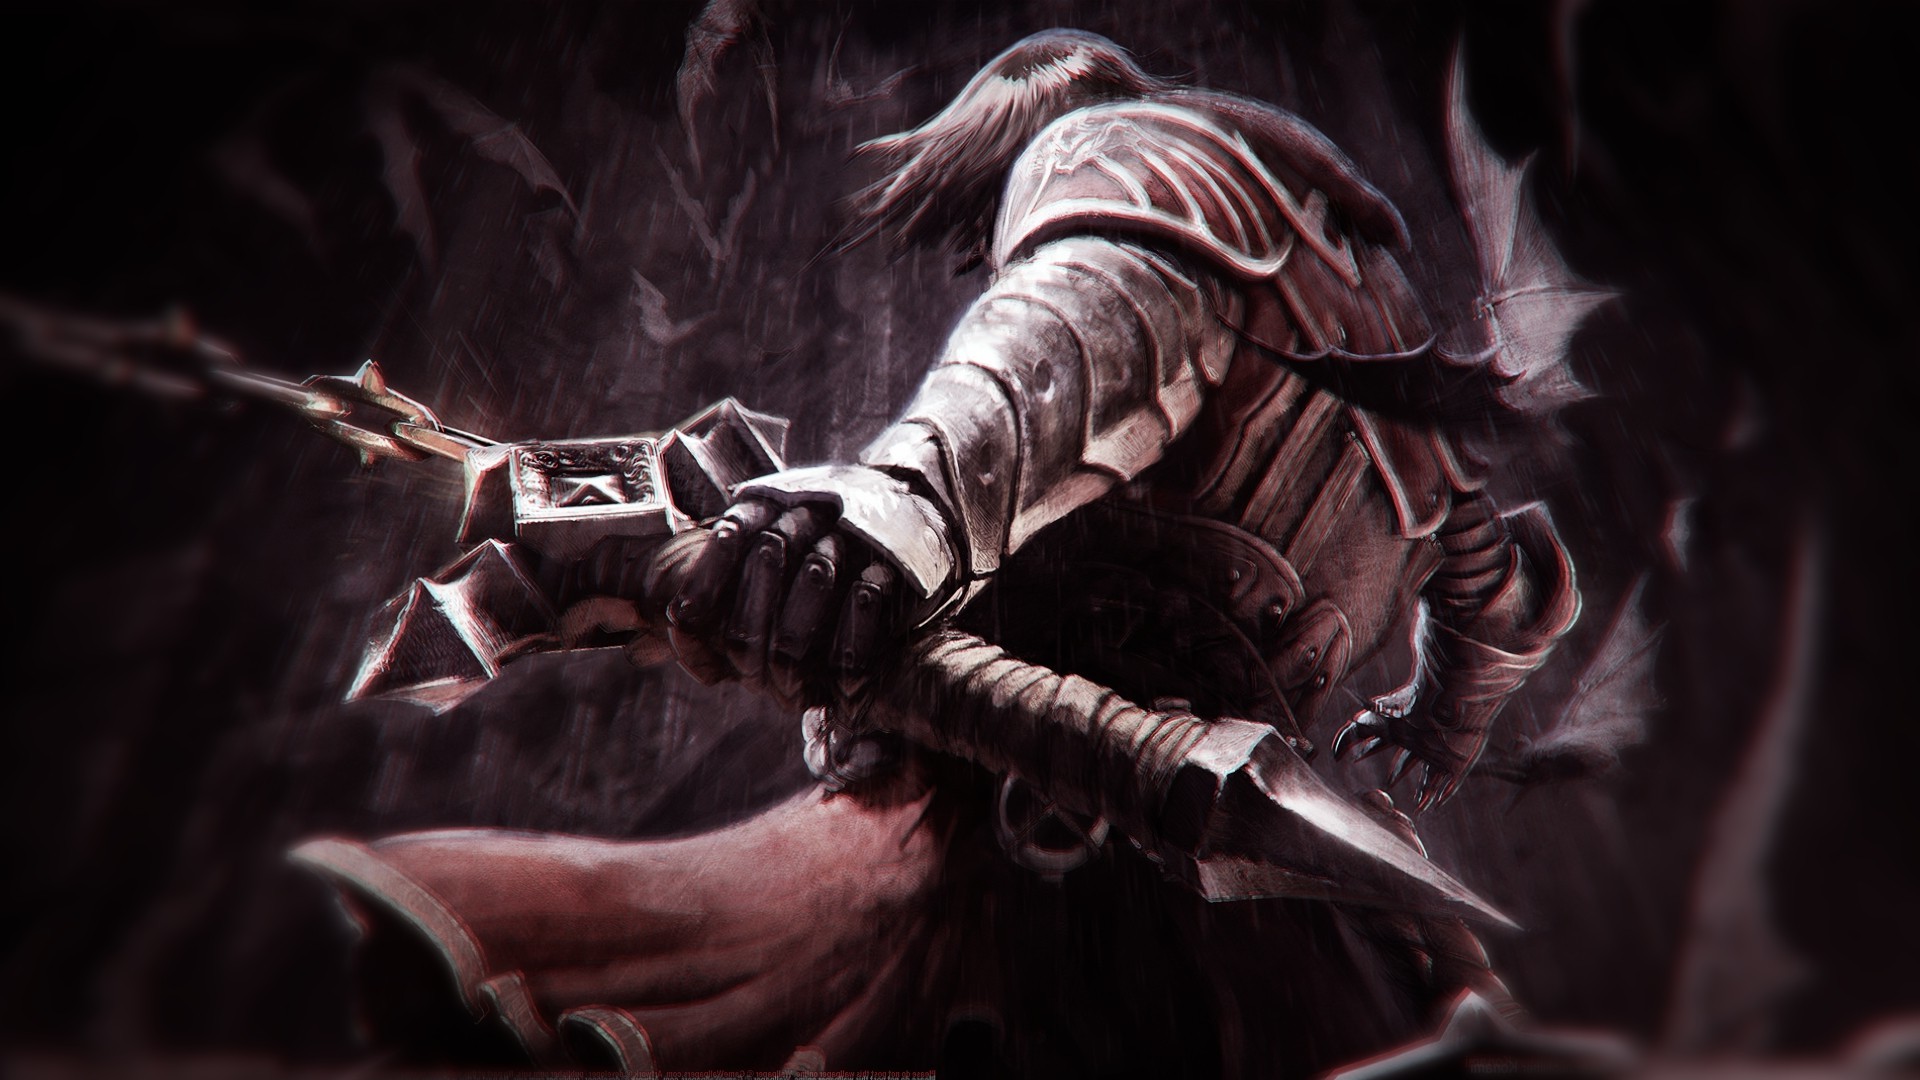 artwork, Video Games, Castlevania: Lords Of Shadow Wallpapers HD ...